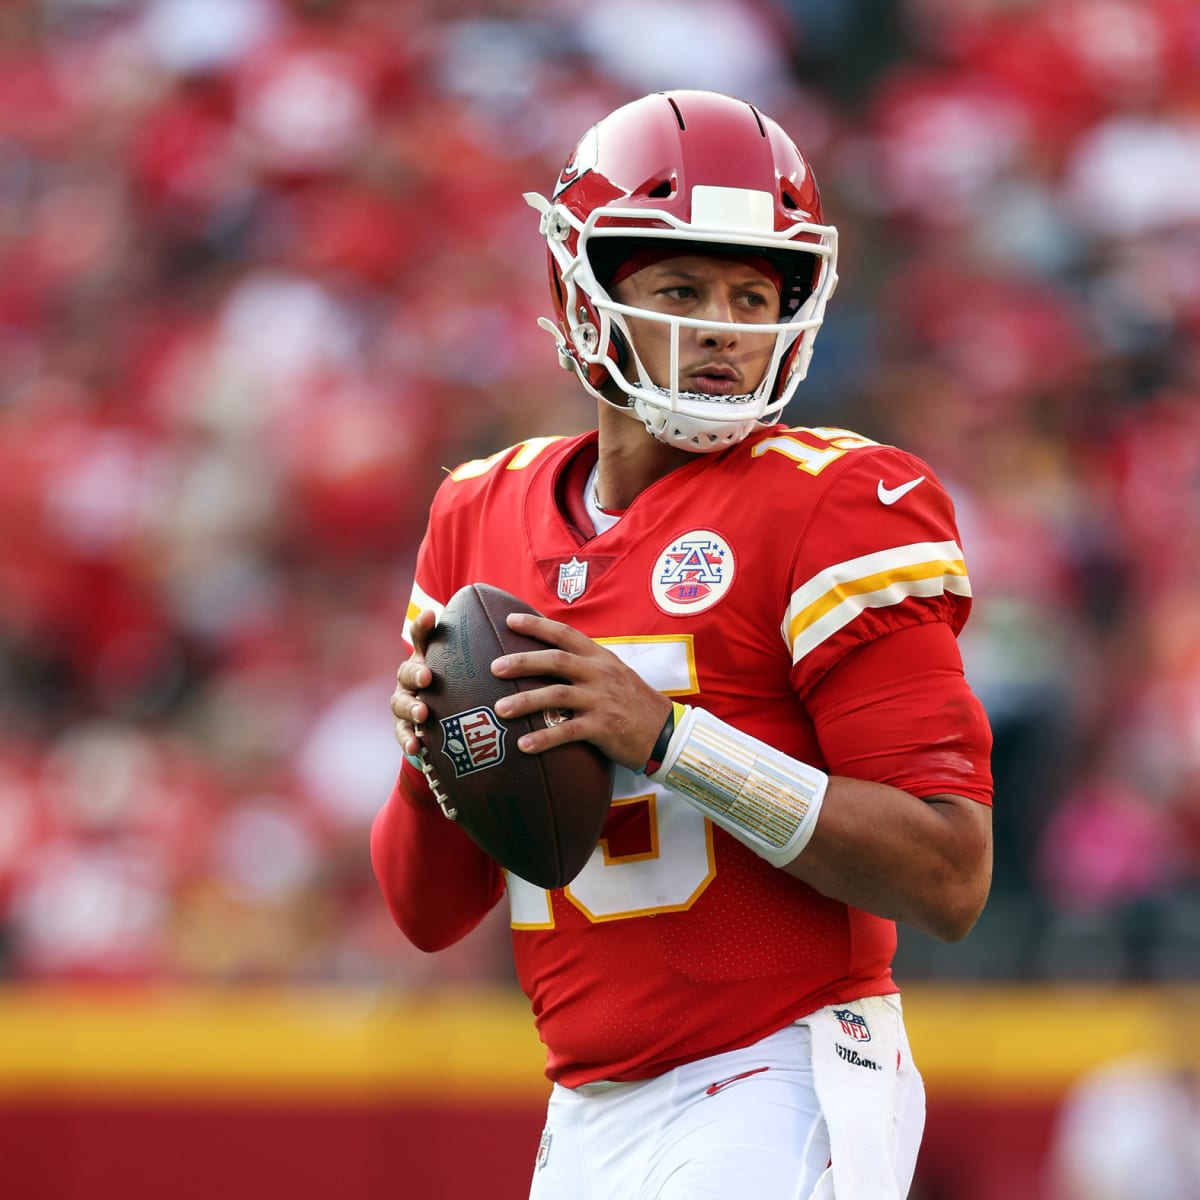 Patrick Mahomes' Game-Worn Jersey and Cleats Sell for $140K at